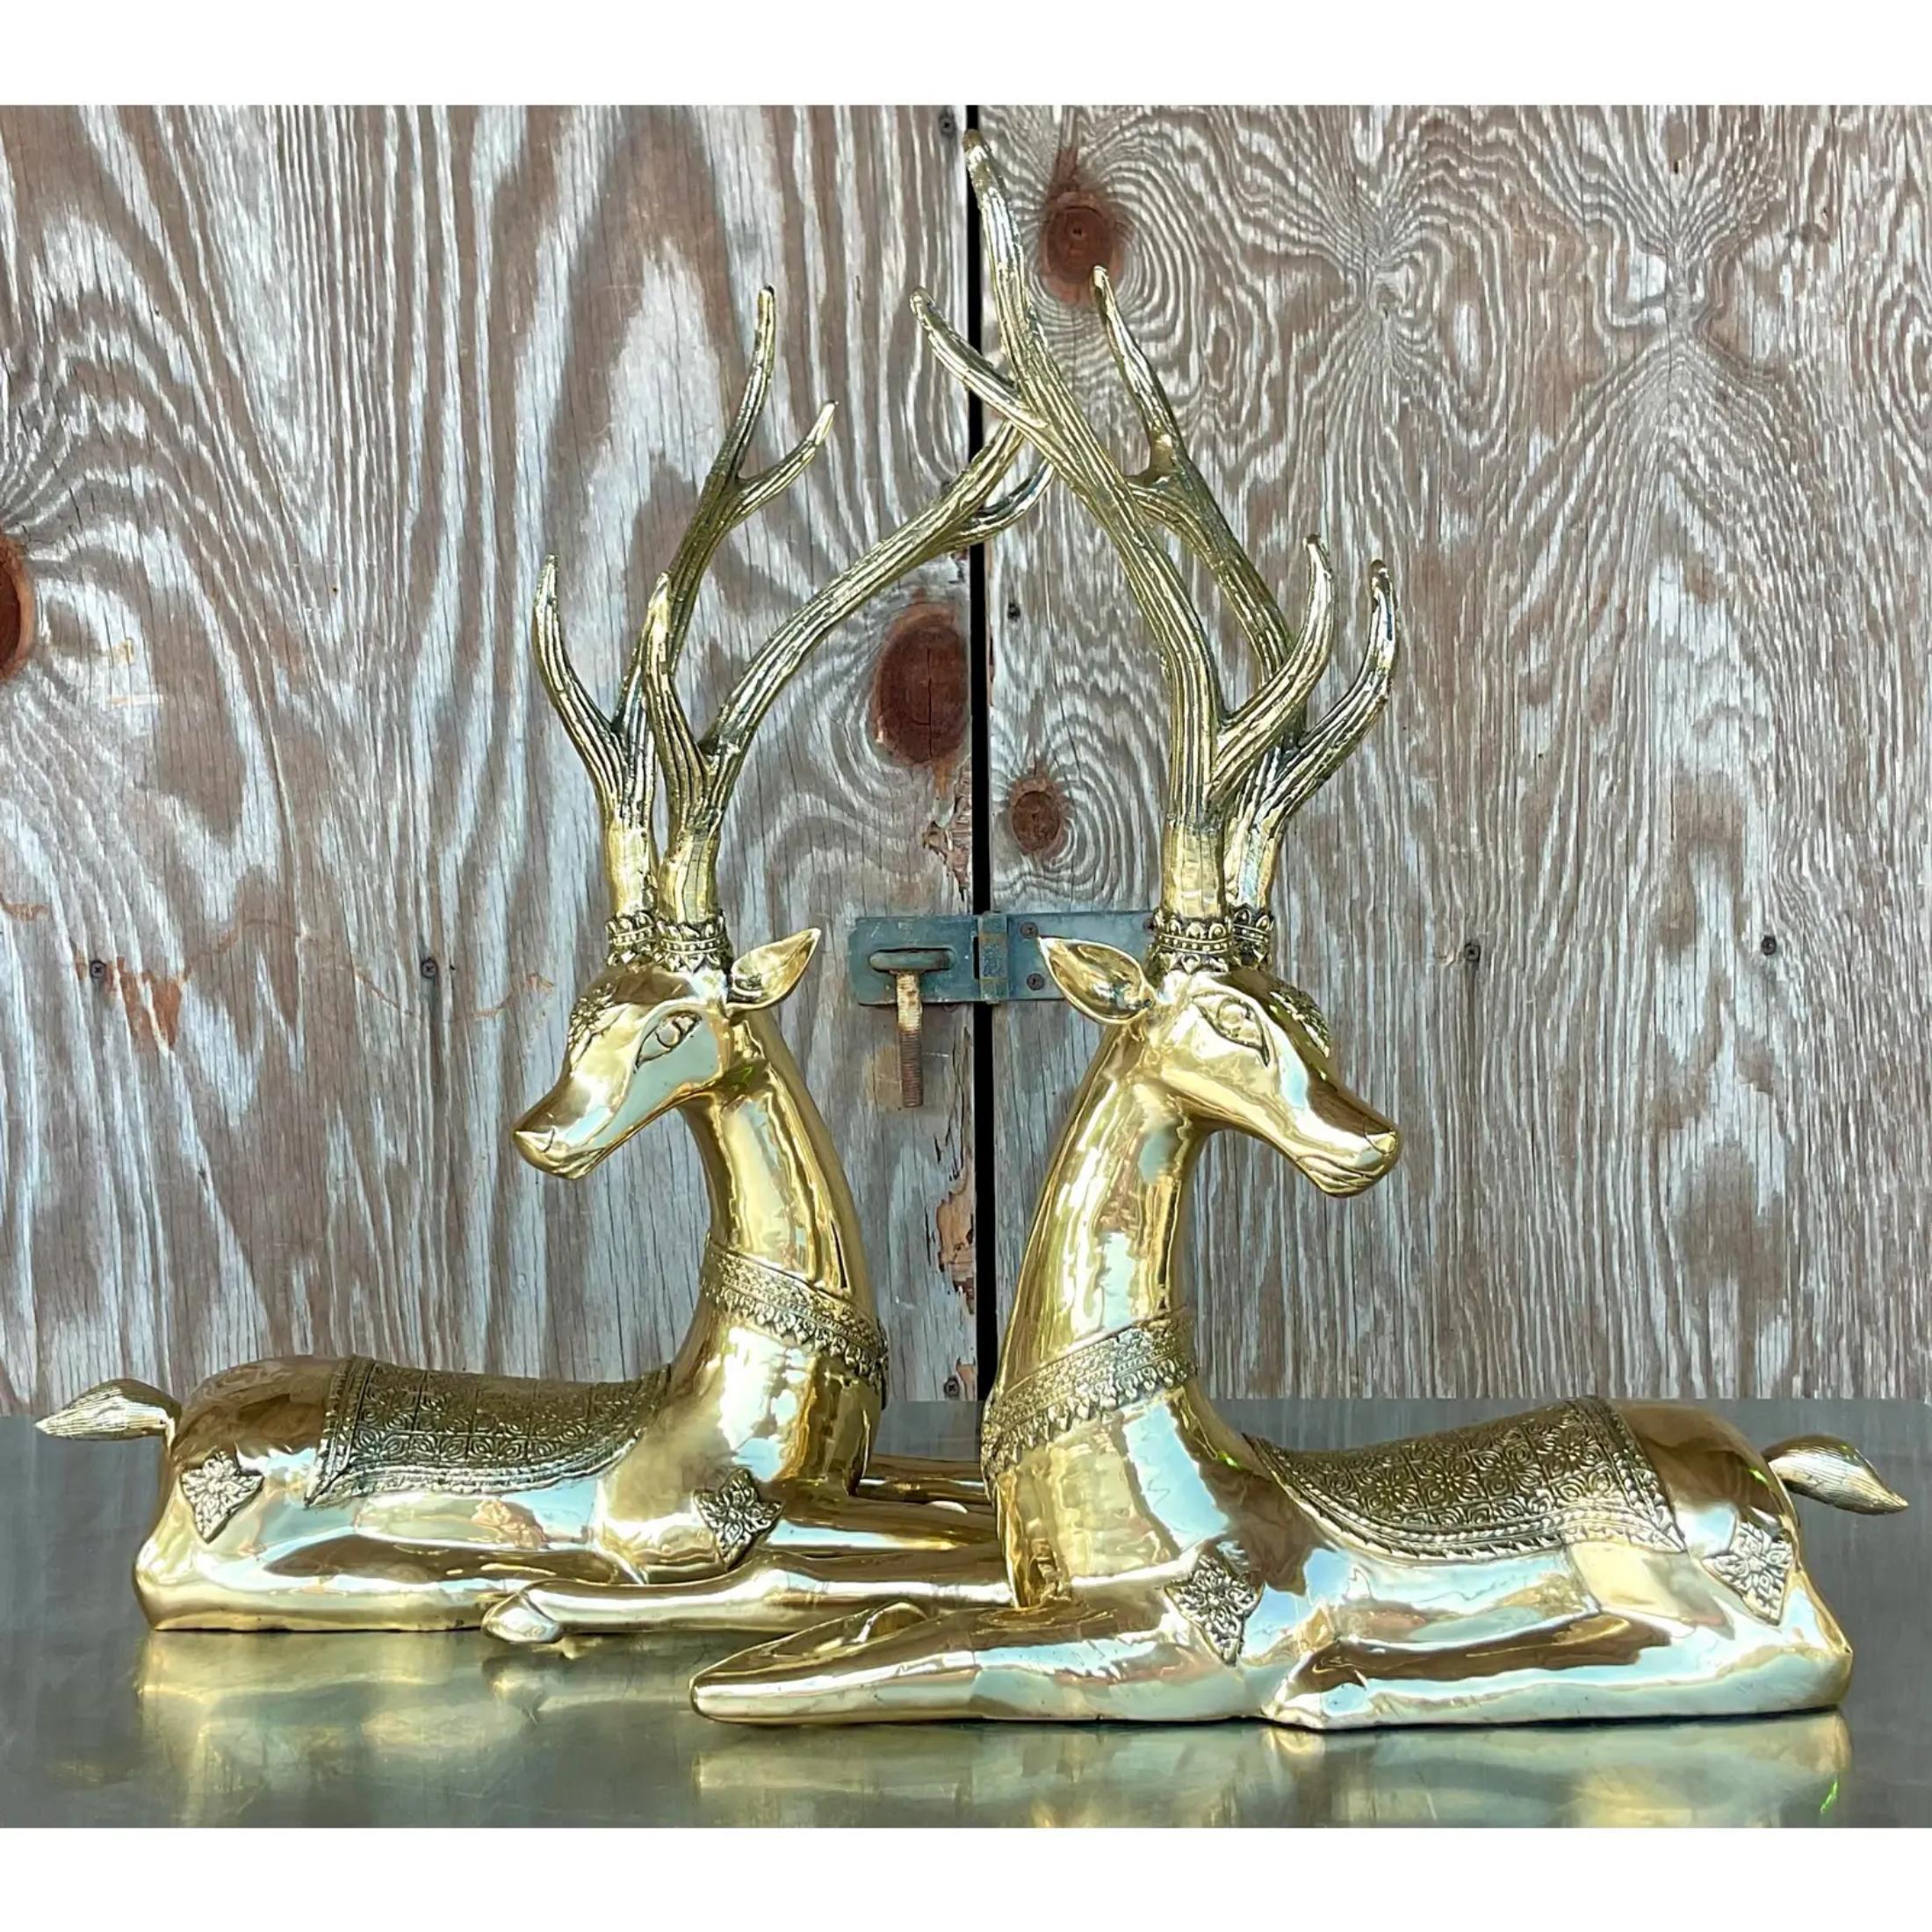 A fantastic vintage Regency pair of deer. Beautiful engraved couple with a heavy brass body. Acquired from a Palm Beach estate